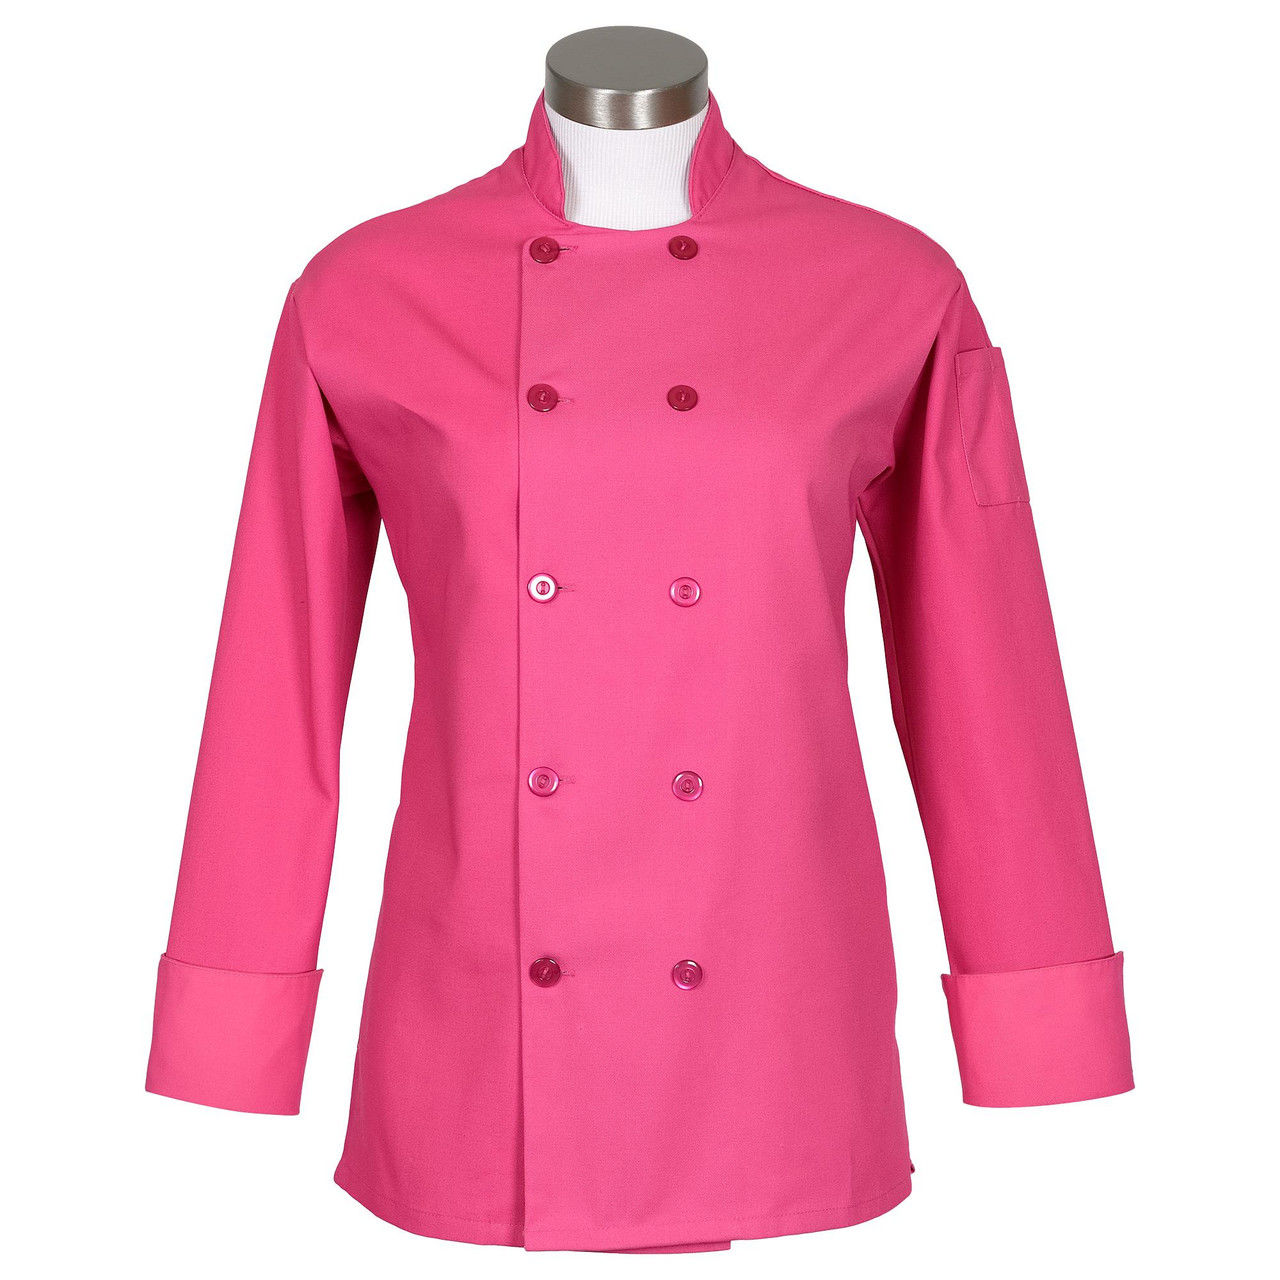 Fame C100P Women's Raspberry Chef Coat with Side Vents Questions & Answers